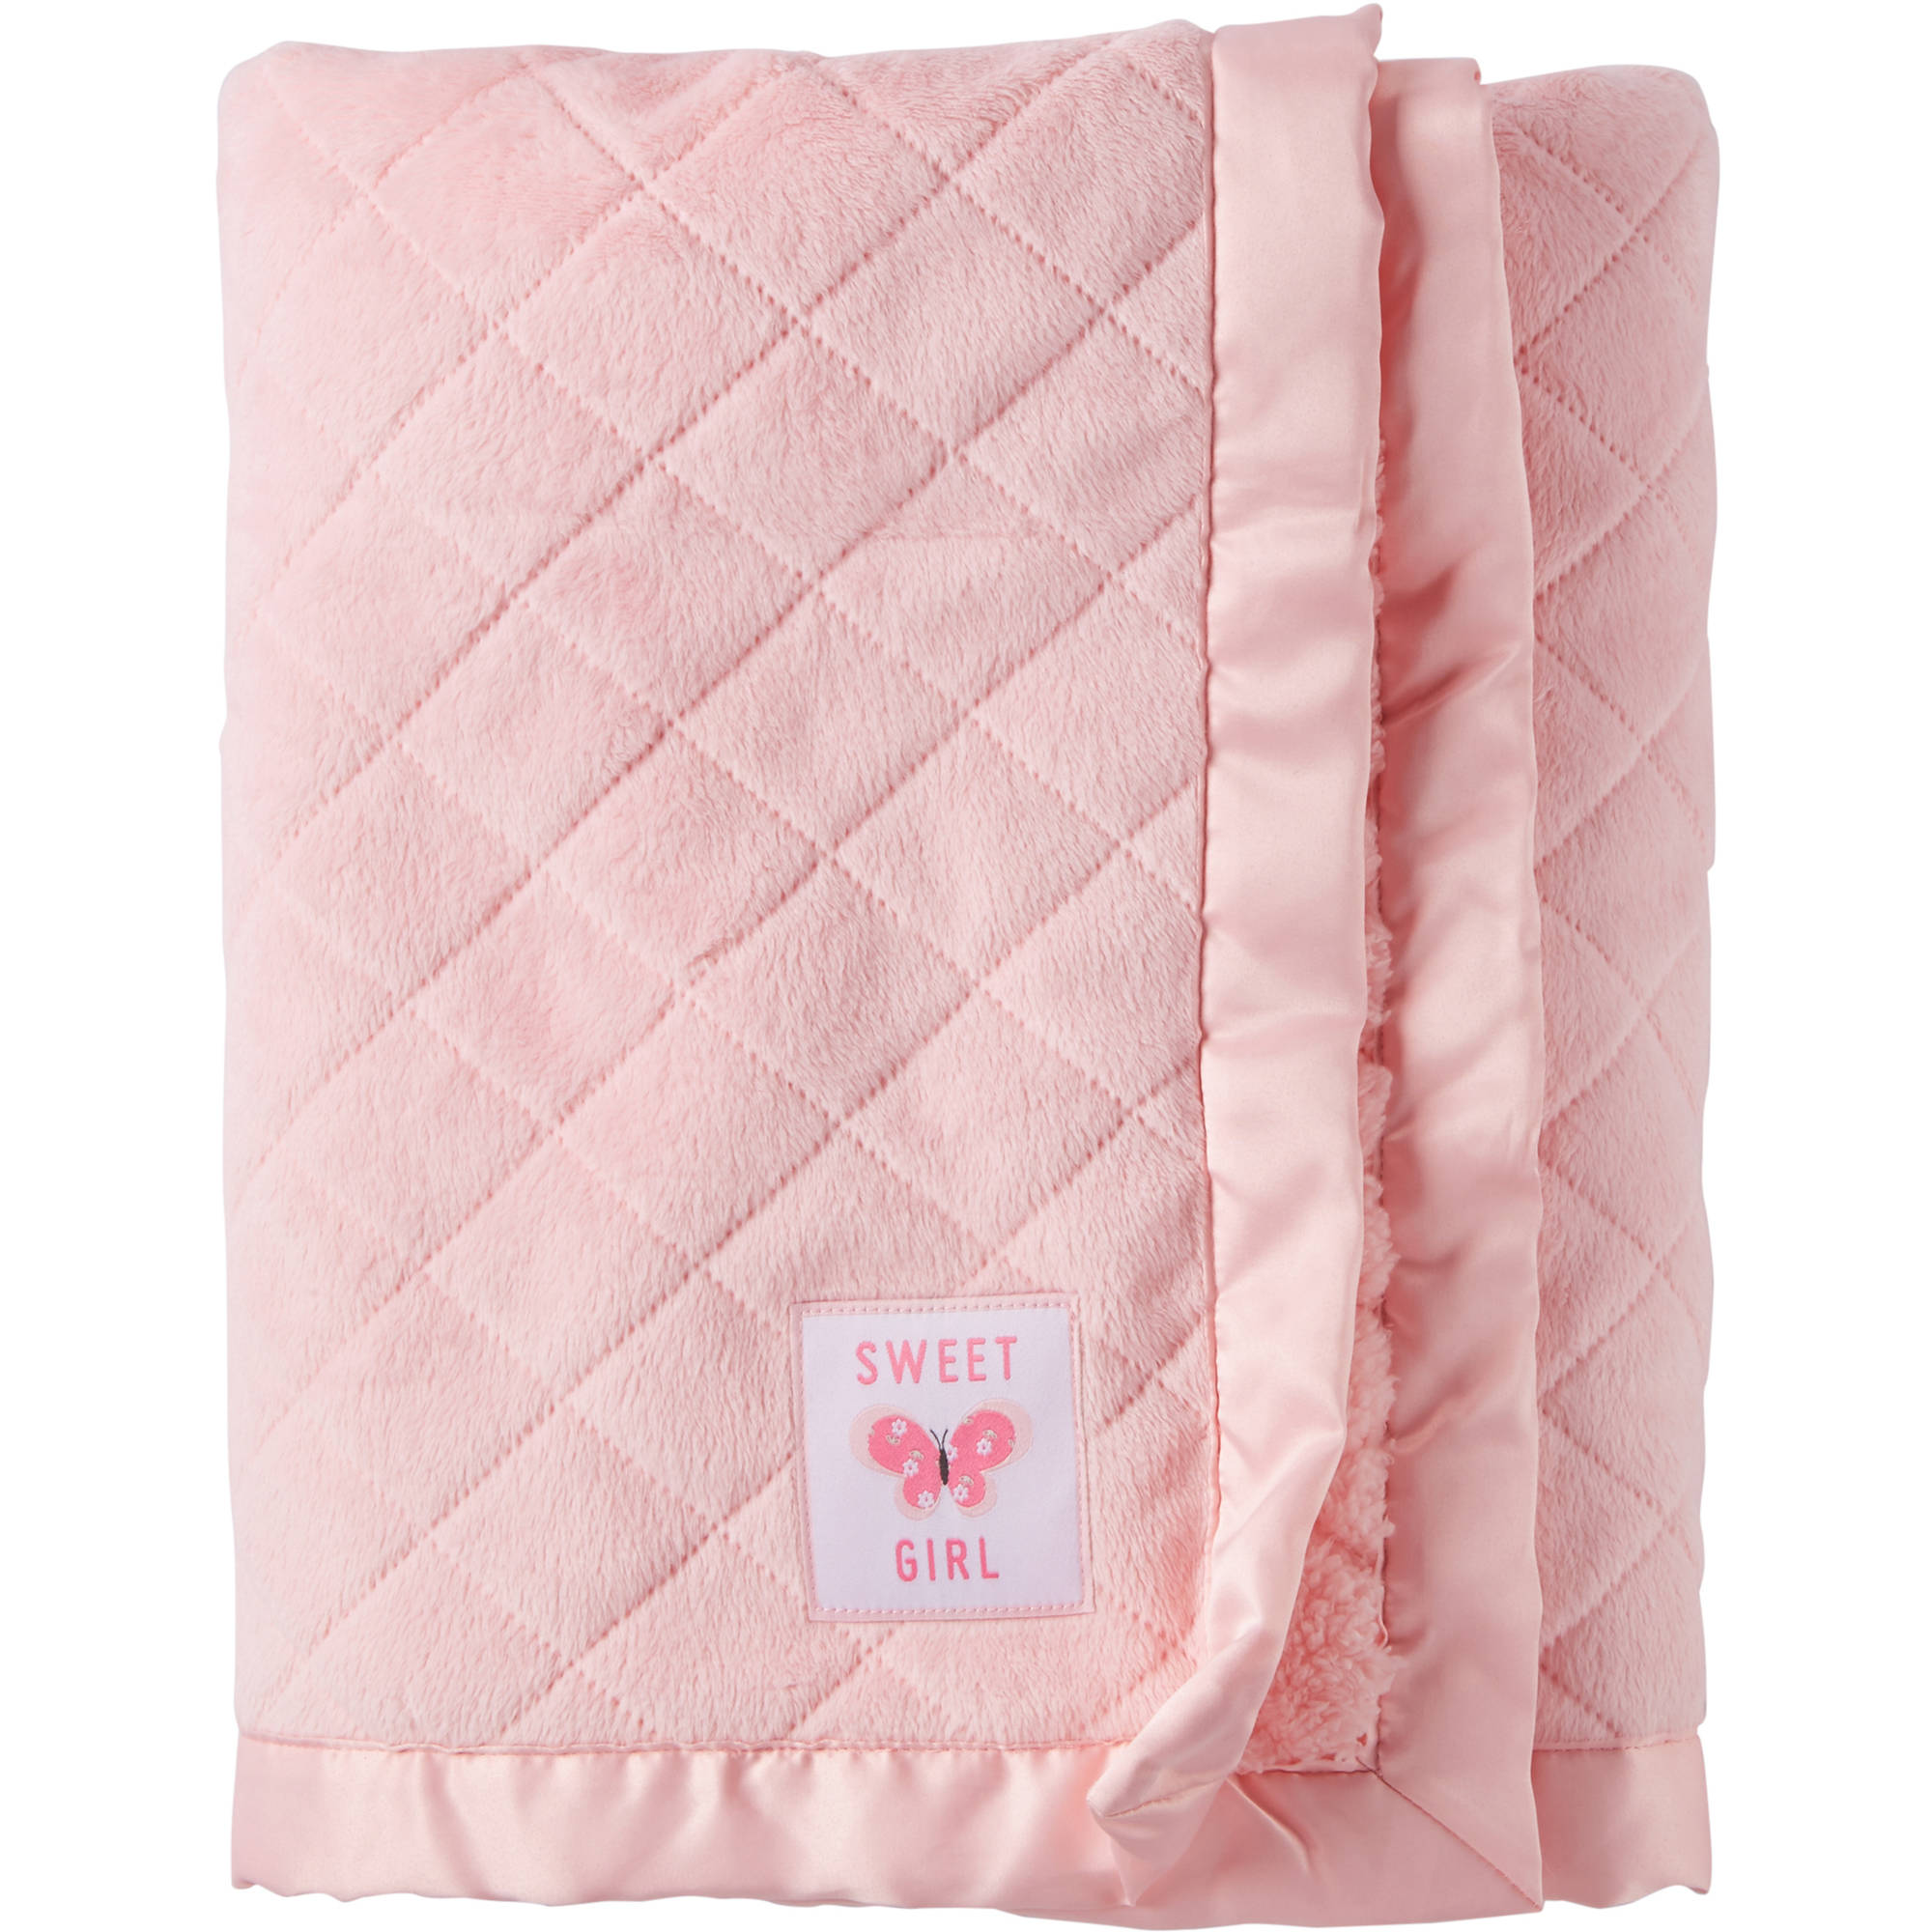 Child of Mine Newborn Quilted Baby Blanket, Pink - image 1 of 1